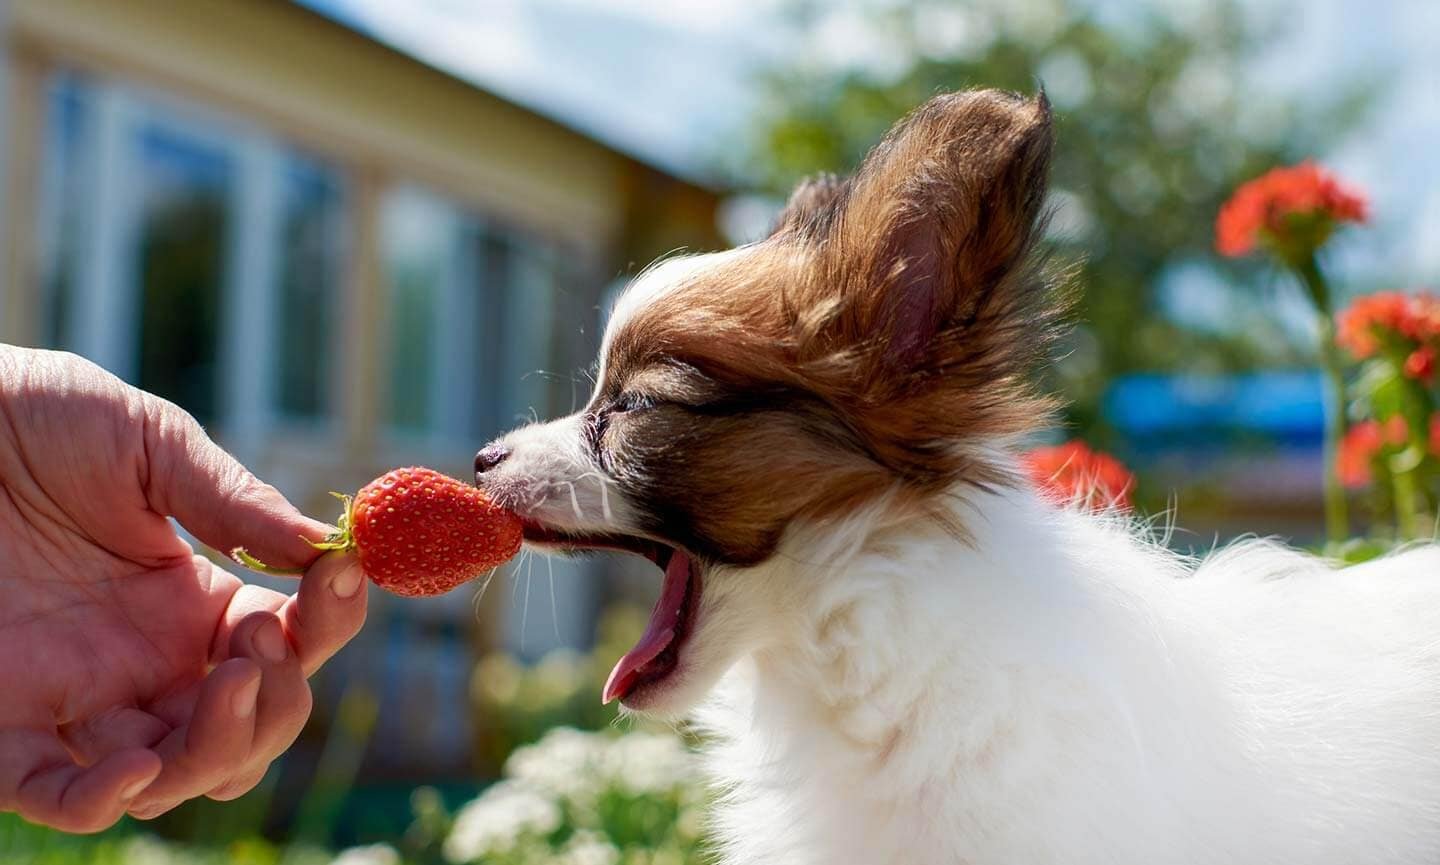 Can Dogs Eat Strawberries? Yes They Can!